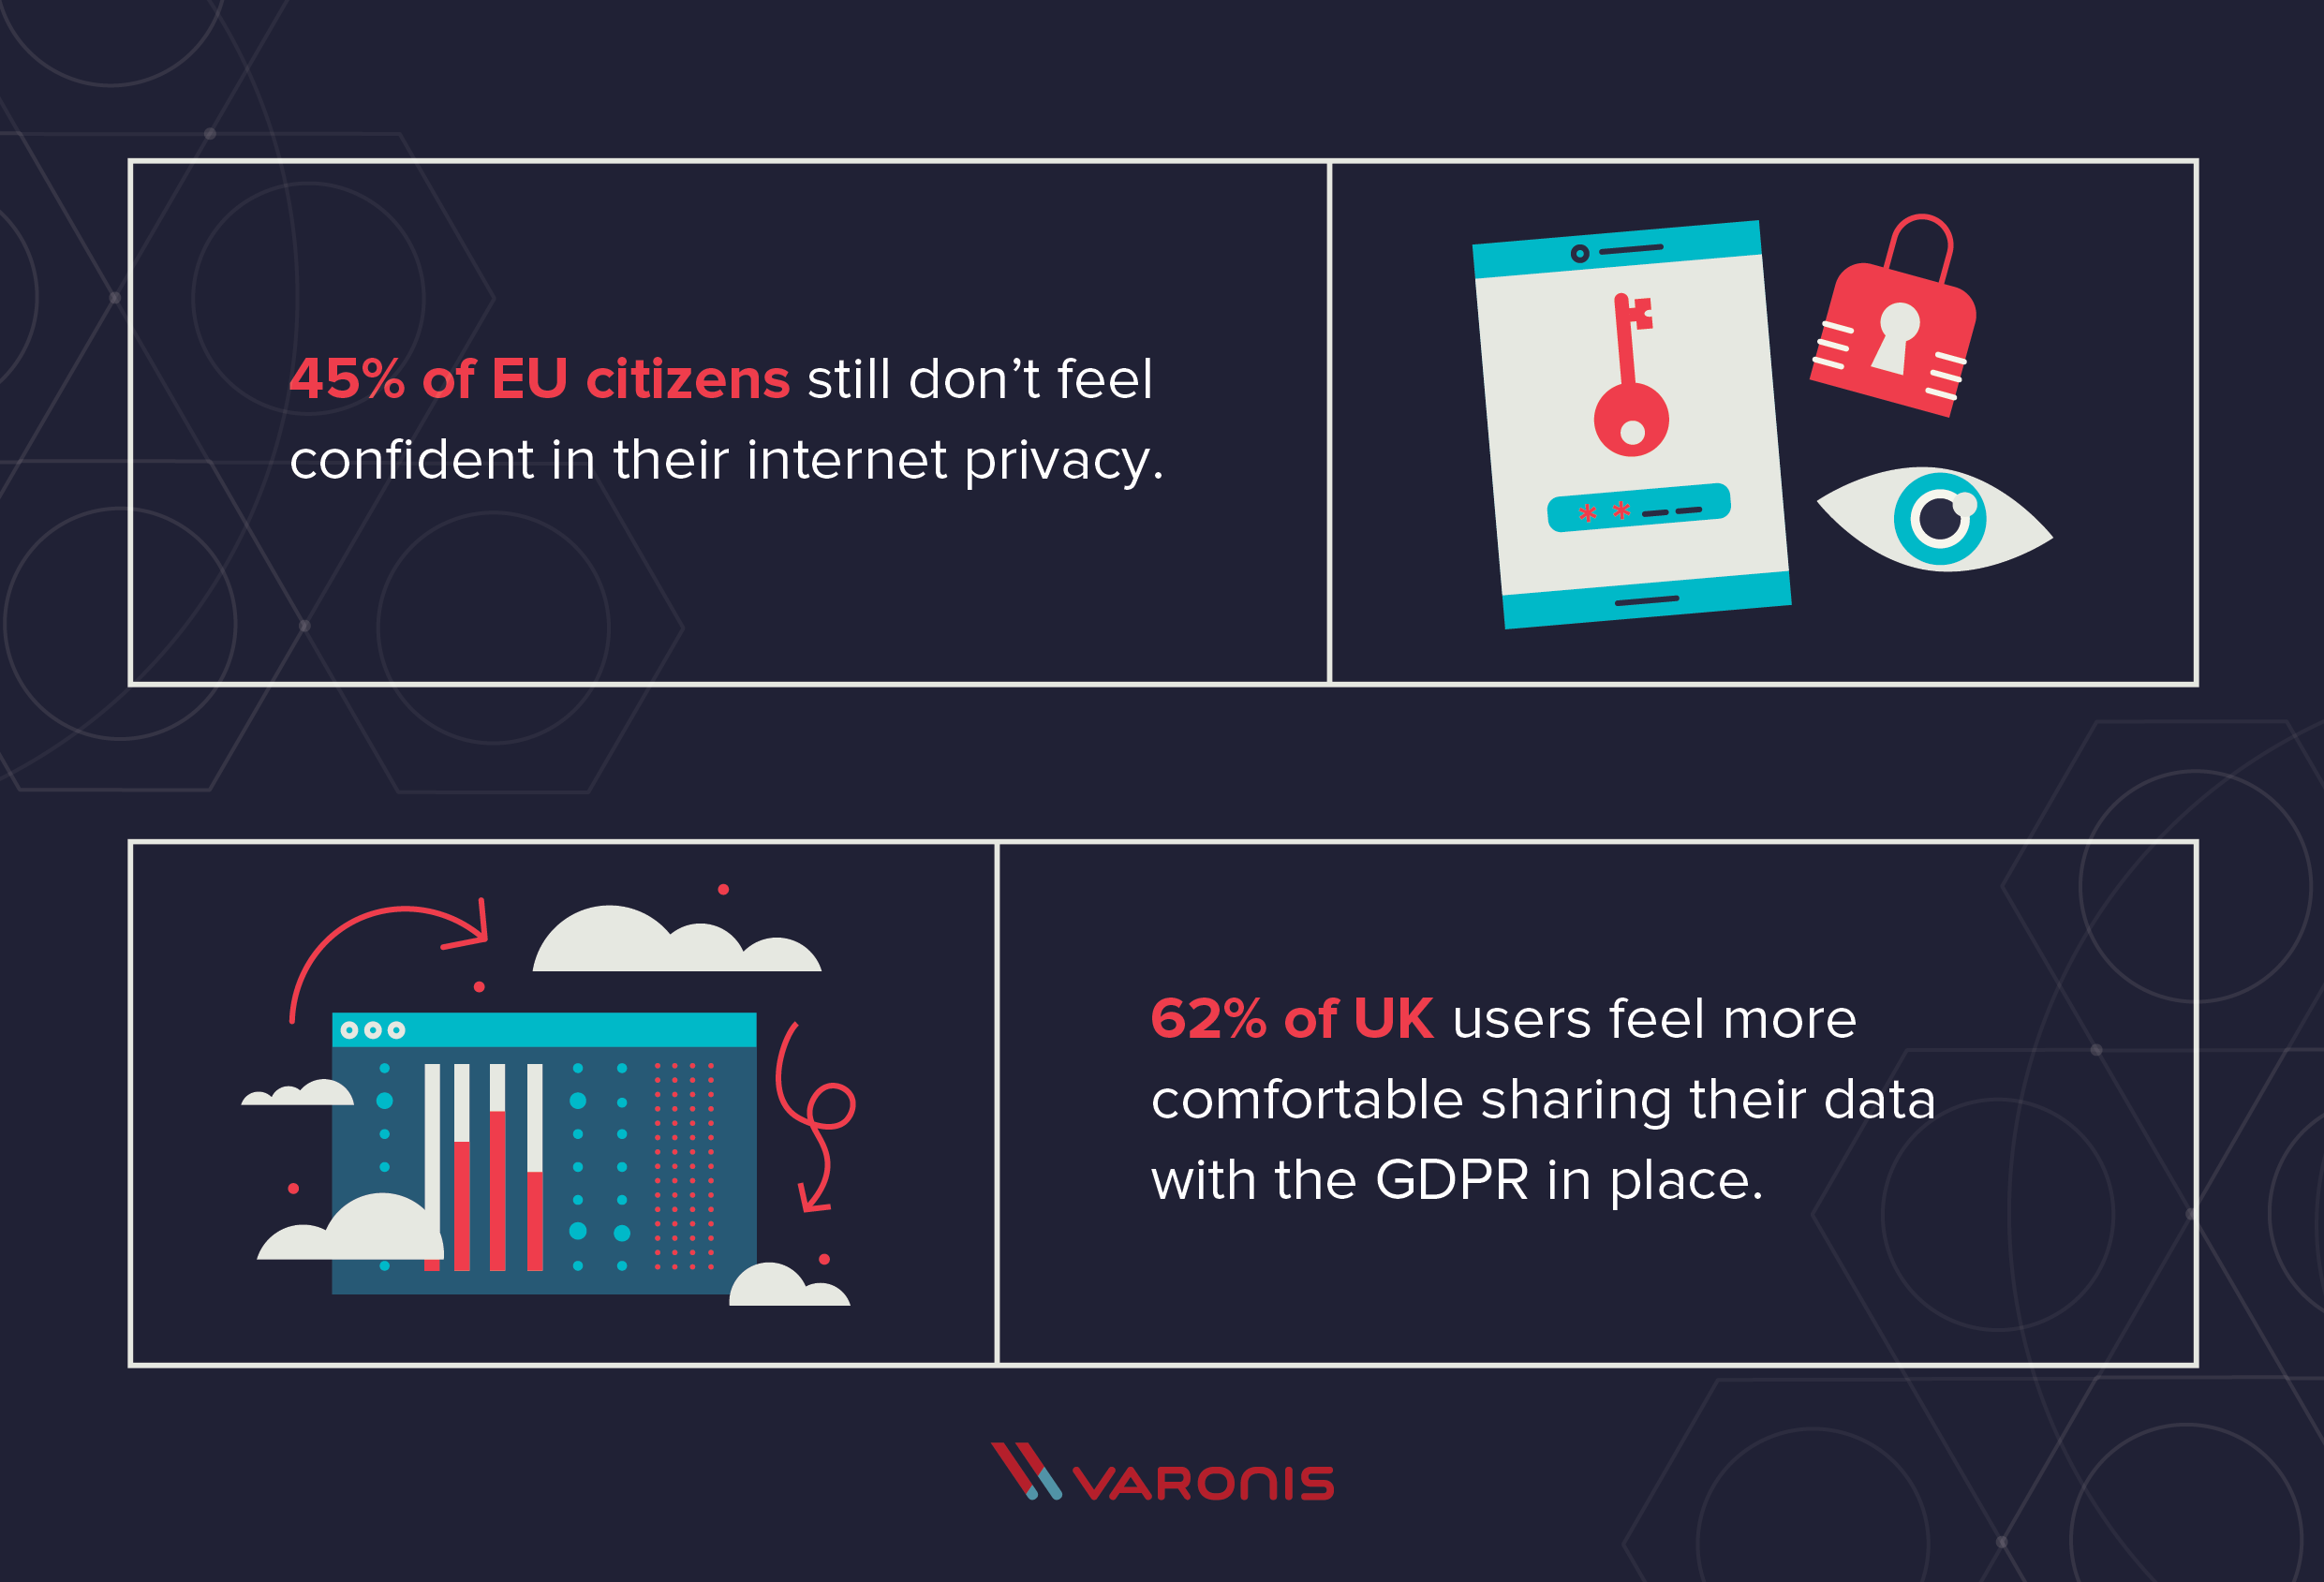 45% of EU citizens still don’t feel confident in their internet privacy. 62% of UK users feel more comfortable sharing their data with the GDPR in place.